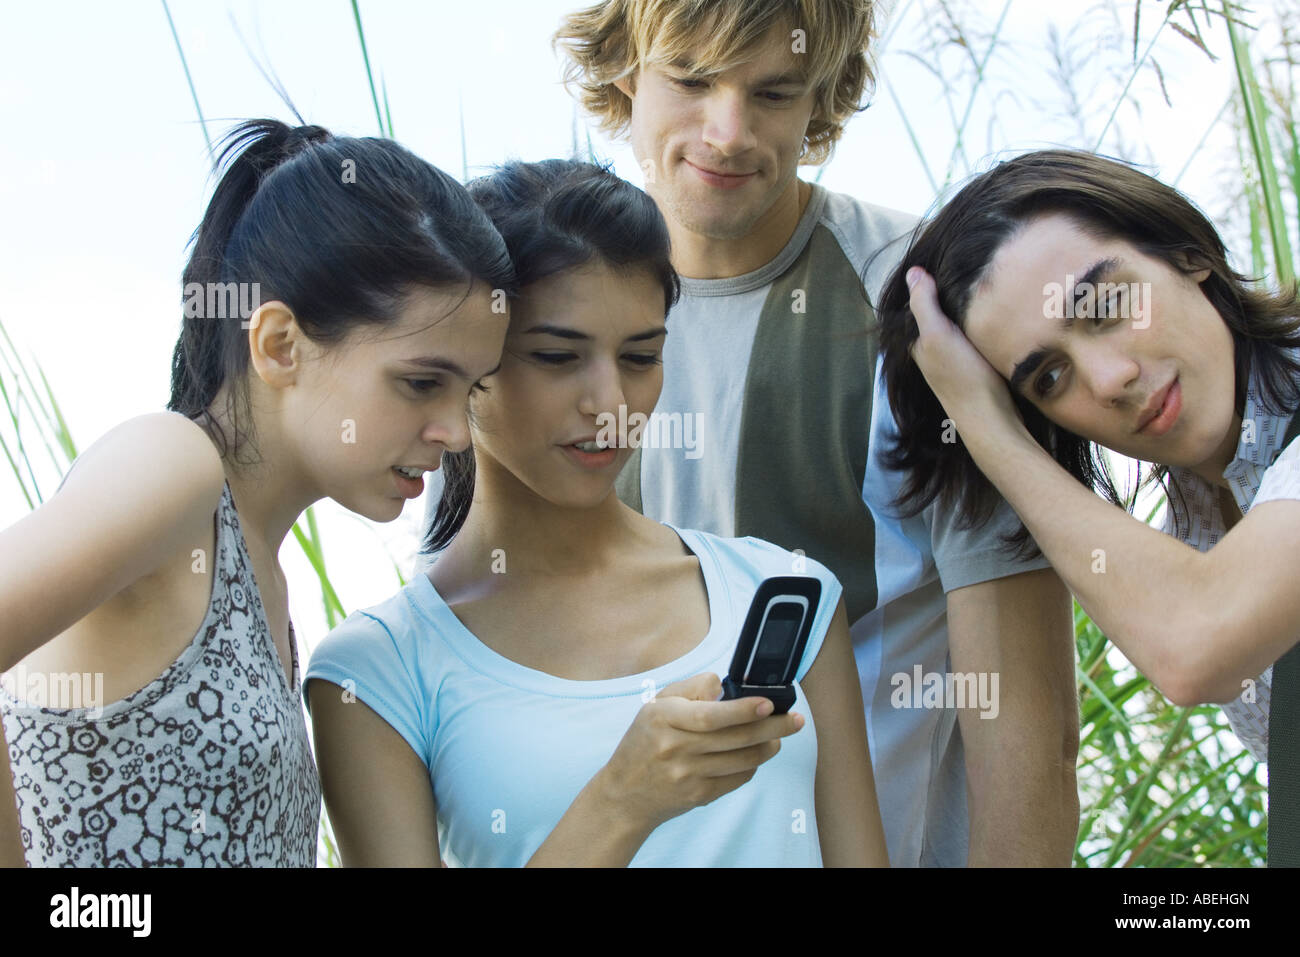 Group of young friends looking at cell phone together Stock Photo